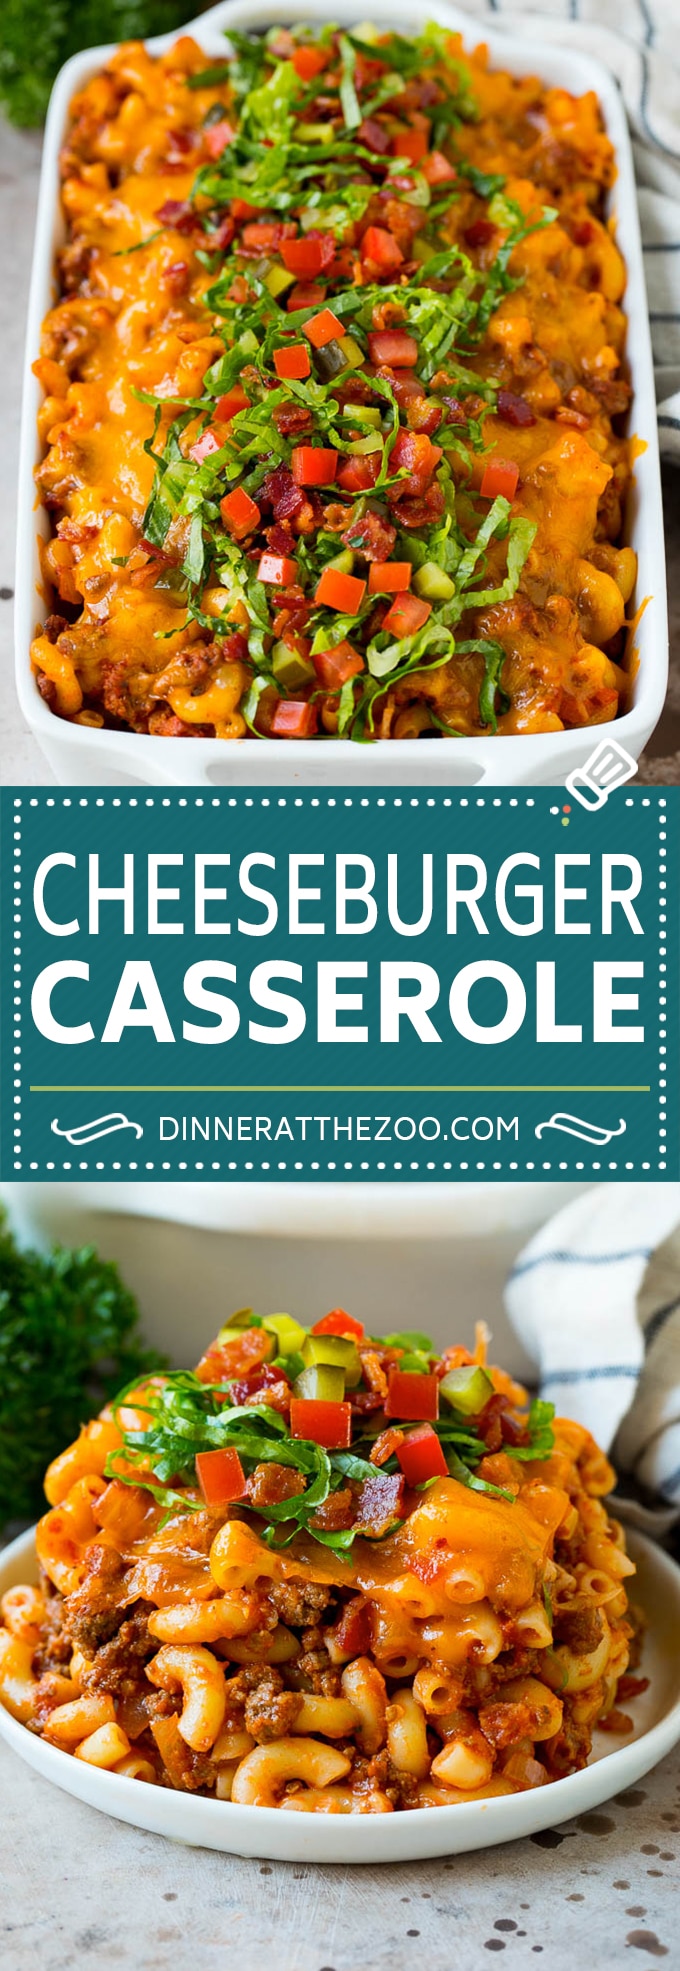 This cheeseburger casserole is ground beef, bacon, macaroni and plenty of cheese, all baked together to perfection.